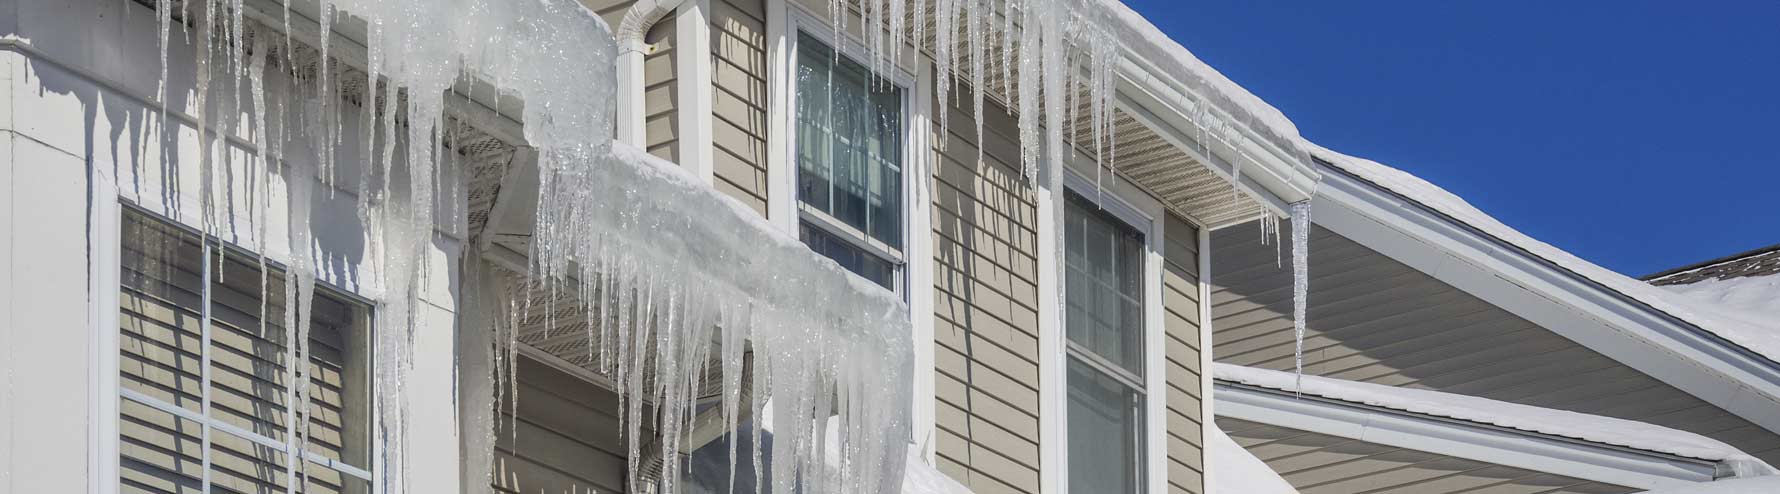 Ice Dams on roof of house